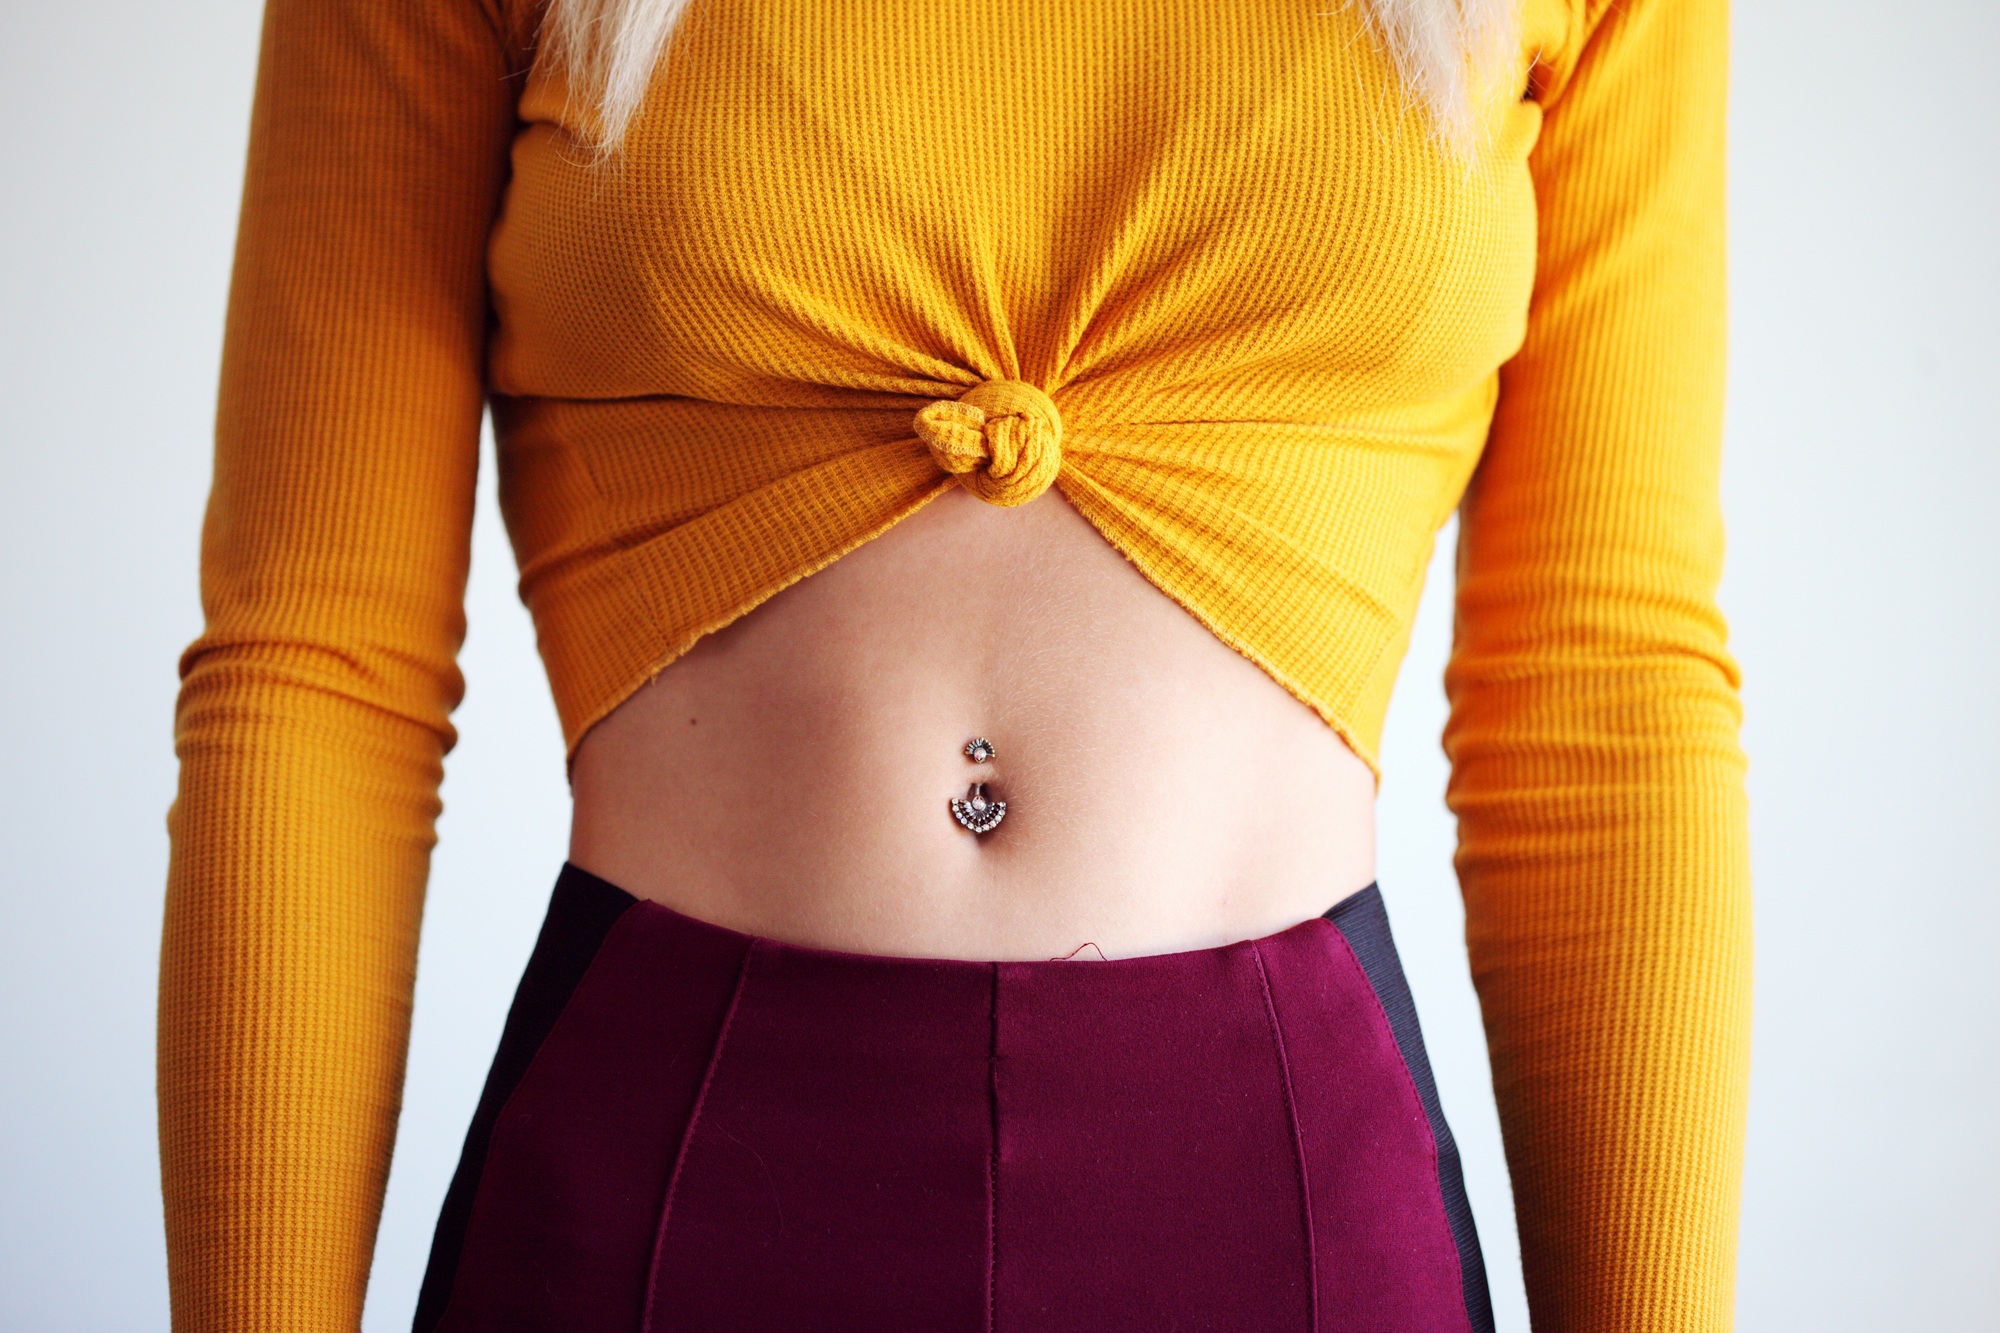 This Is How to Change Your Belly Button Ring